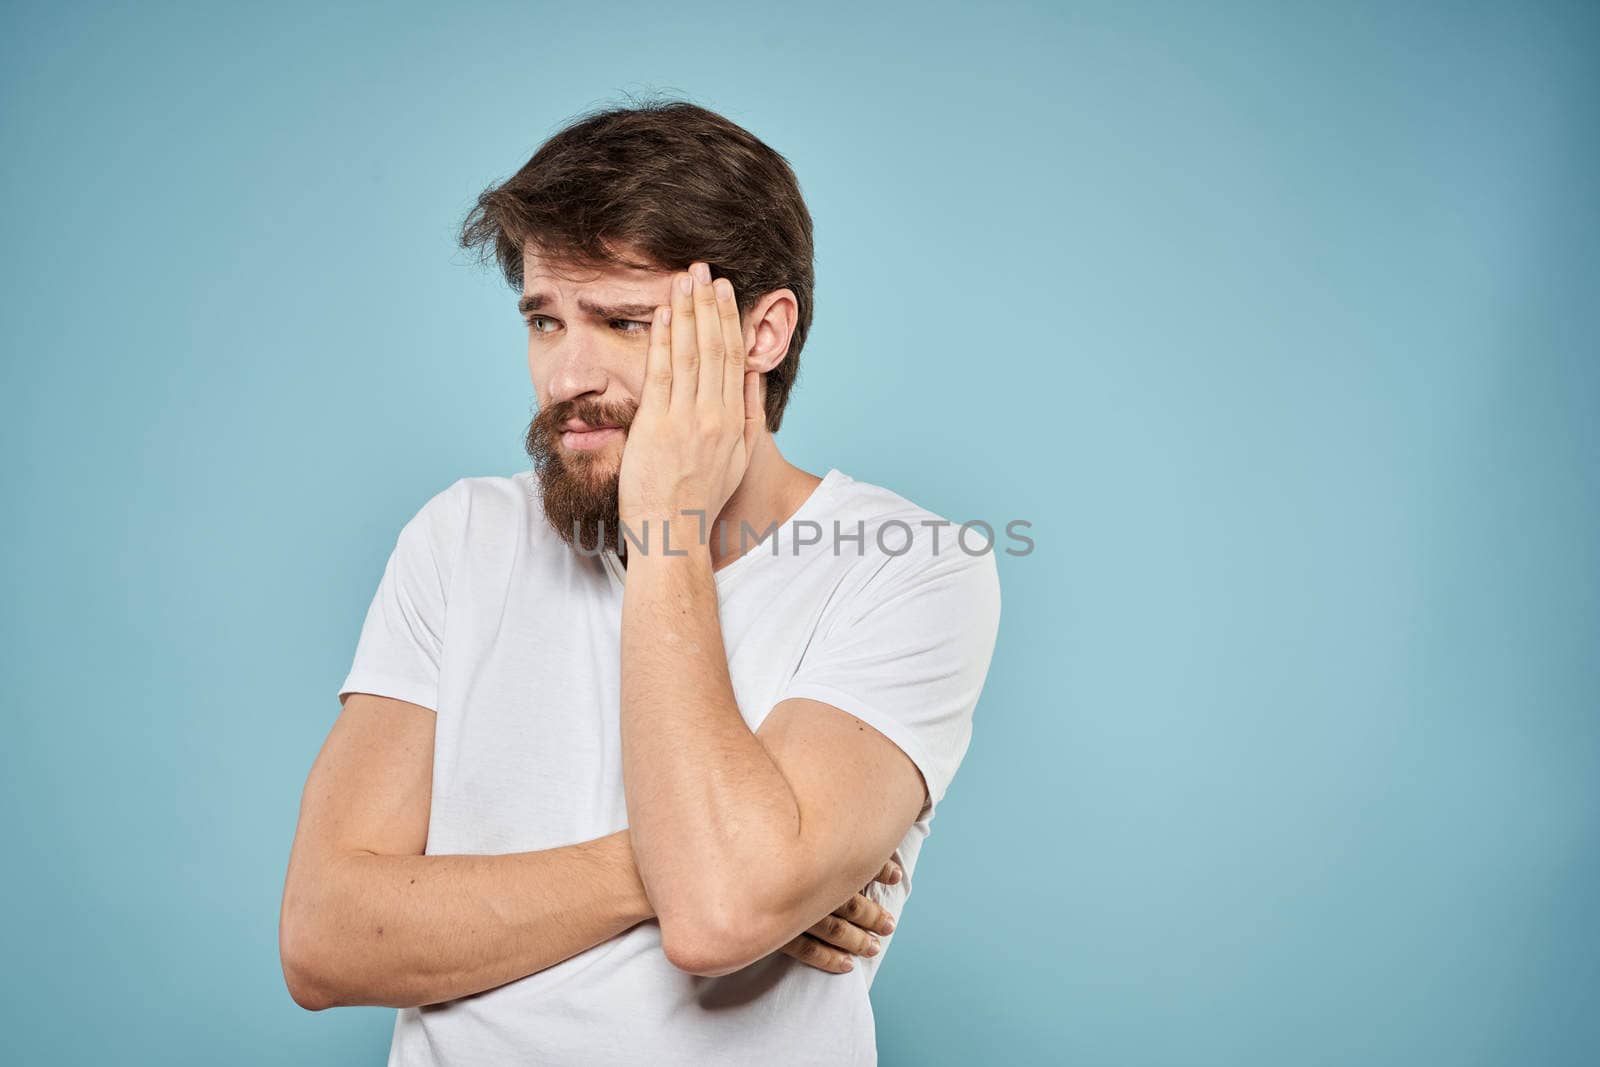 Bearded man emotions white t-shirt lifestyle gestures with hands blue backgrounds by SHOTPRIME